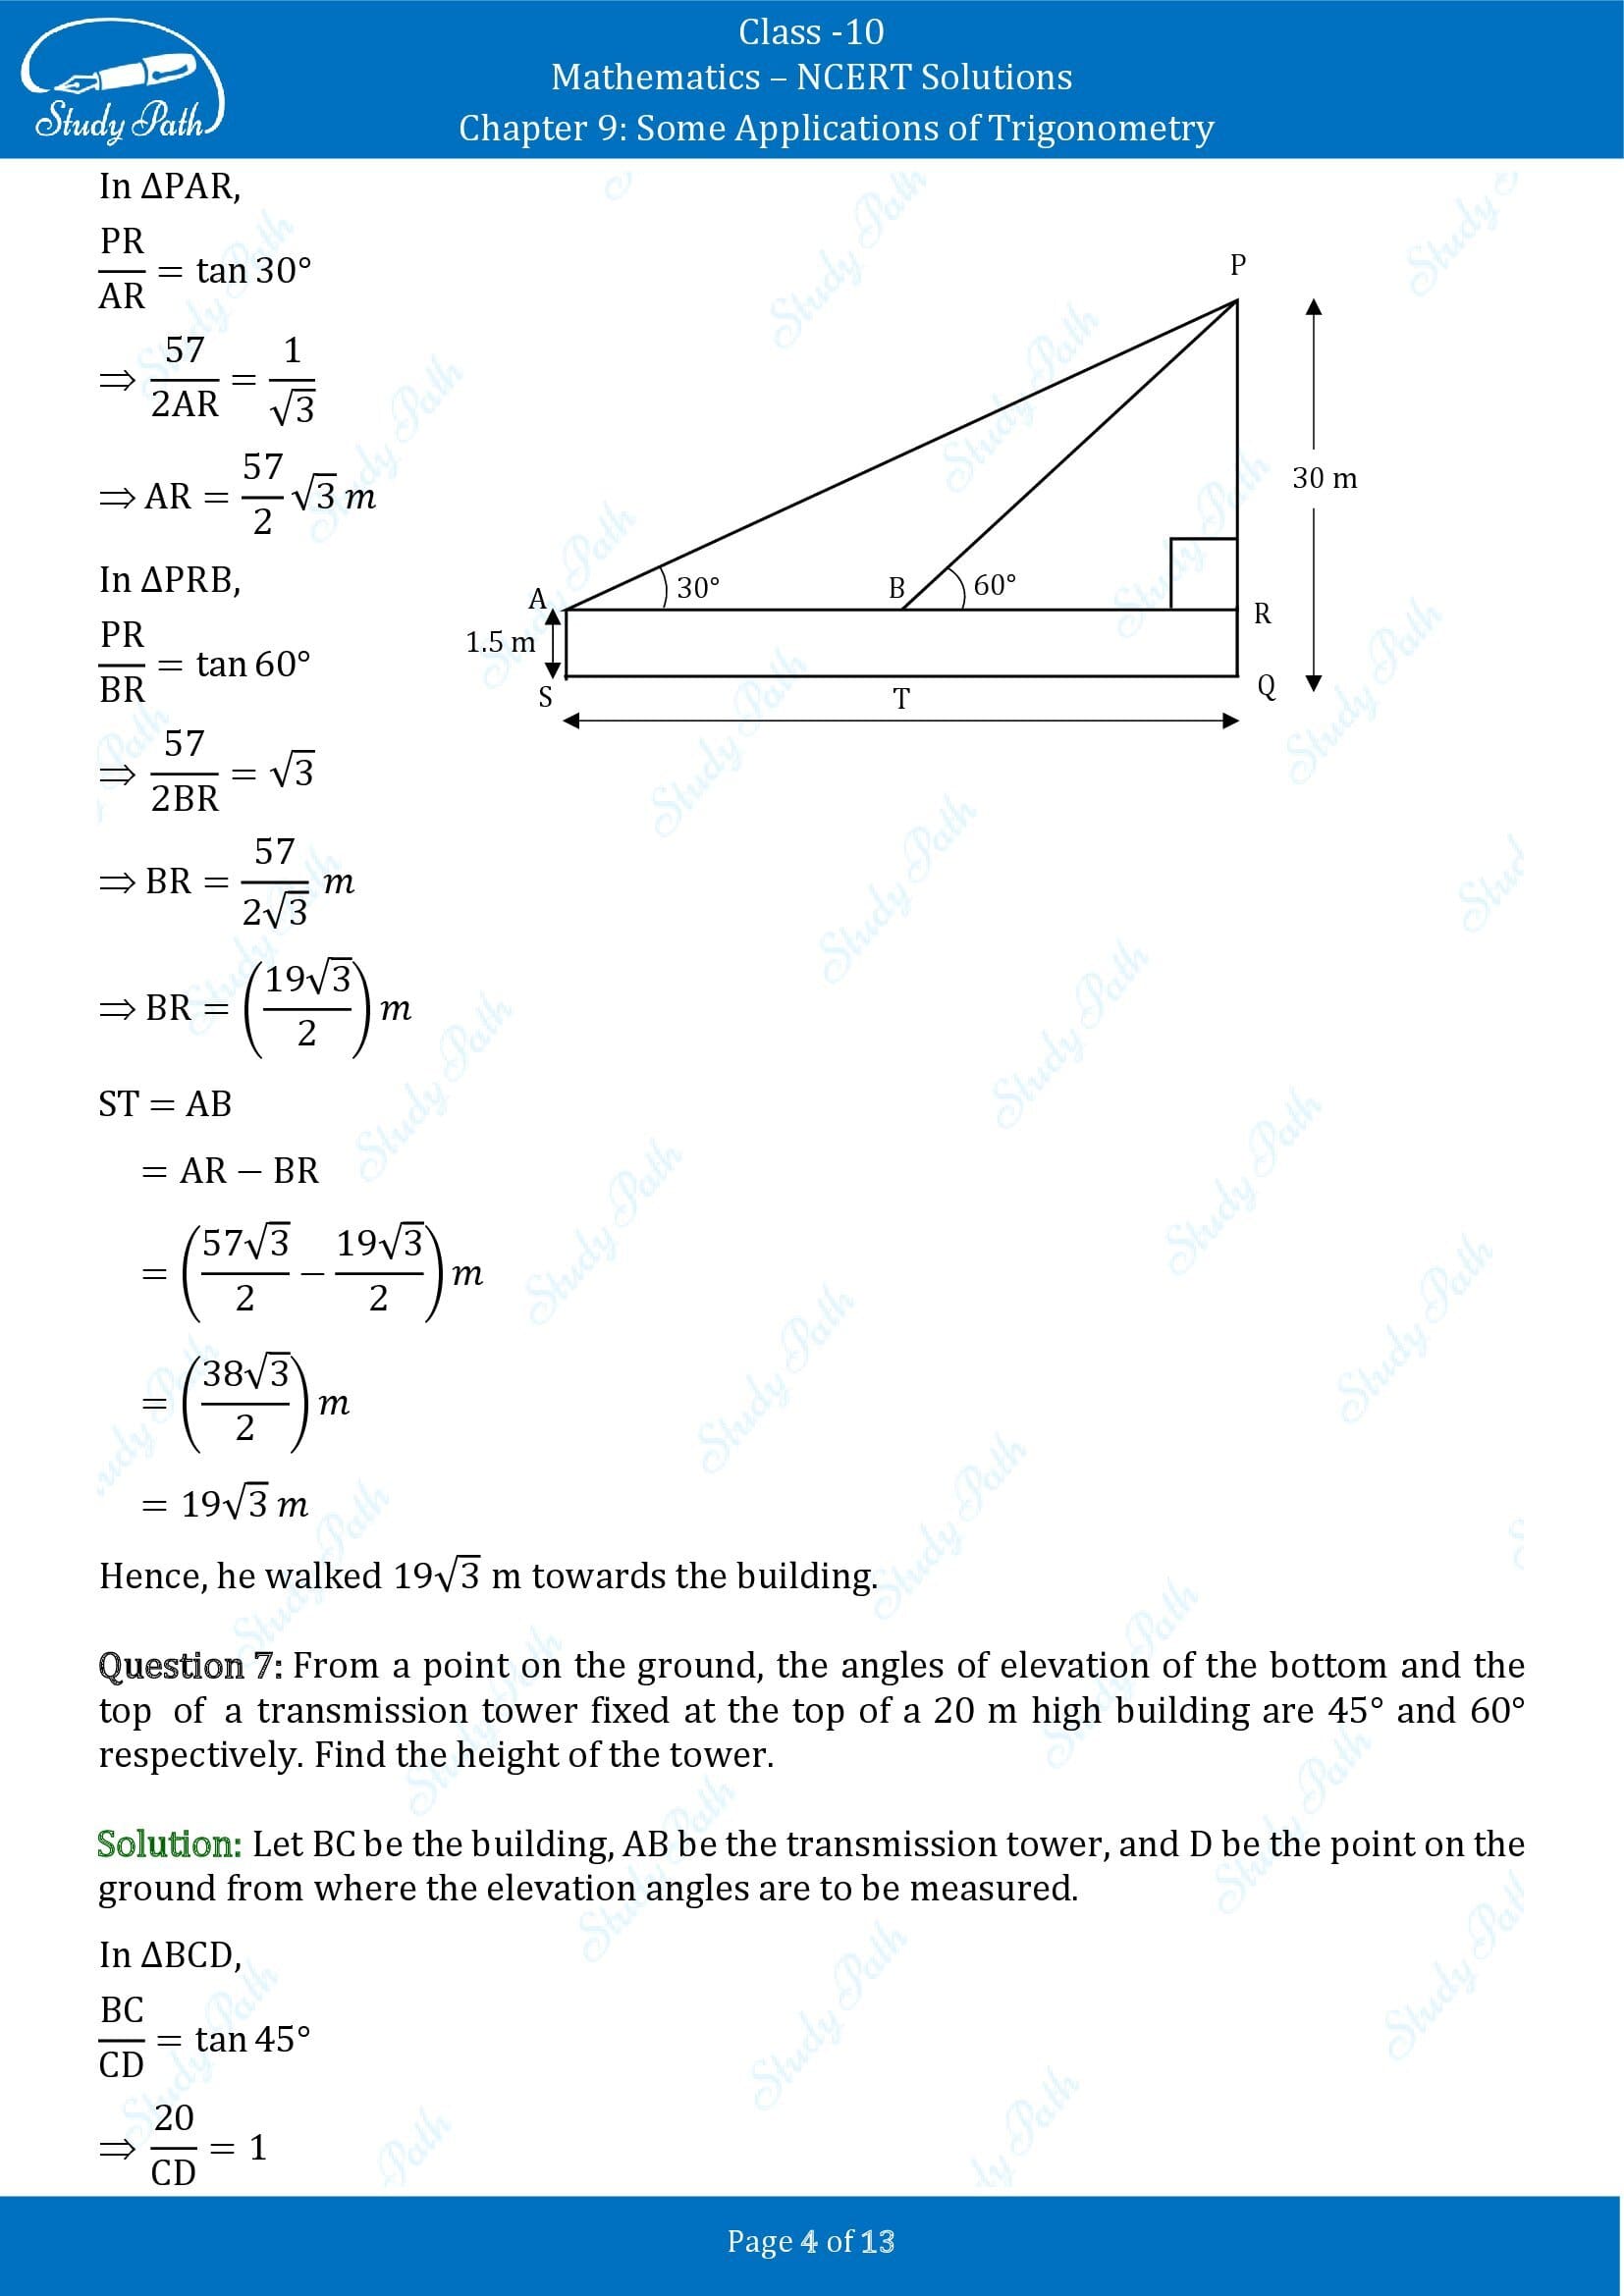 NCERT Solutions for Class 10 Maths Chapter 9 Some Applications of Trigonometry 00004